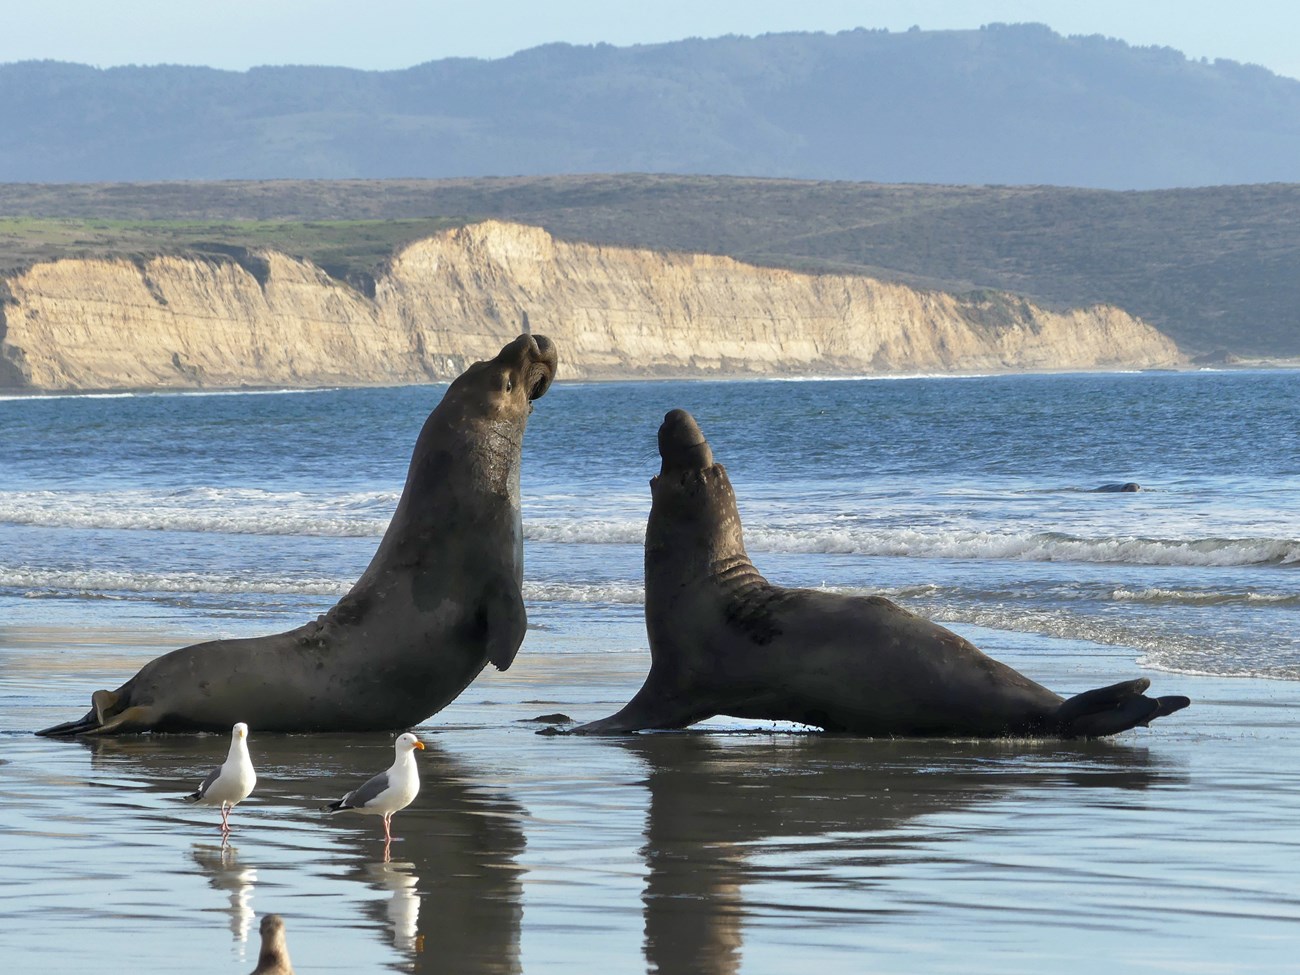 Two hefty elephant seals face off at the edge of the surf. One of them is mid-leap, appearing taller than its opponent with just its hind end still in contact with the beach. Iconic Point Reyes bluffs make for a scenic backdrop to the drama.